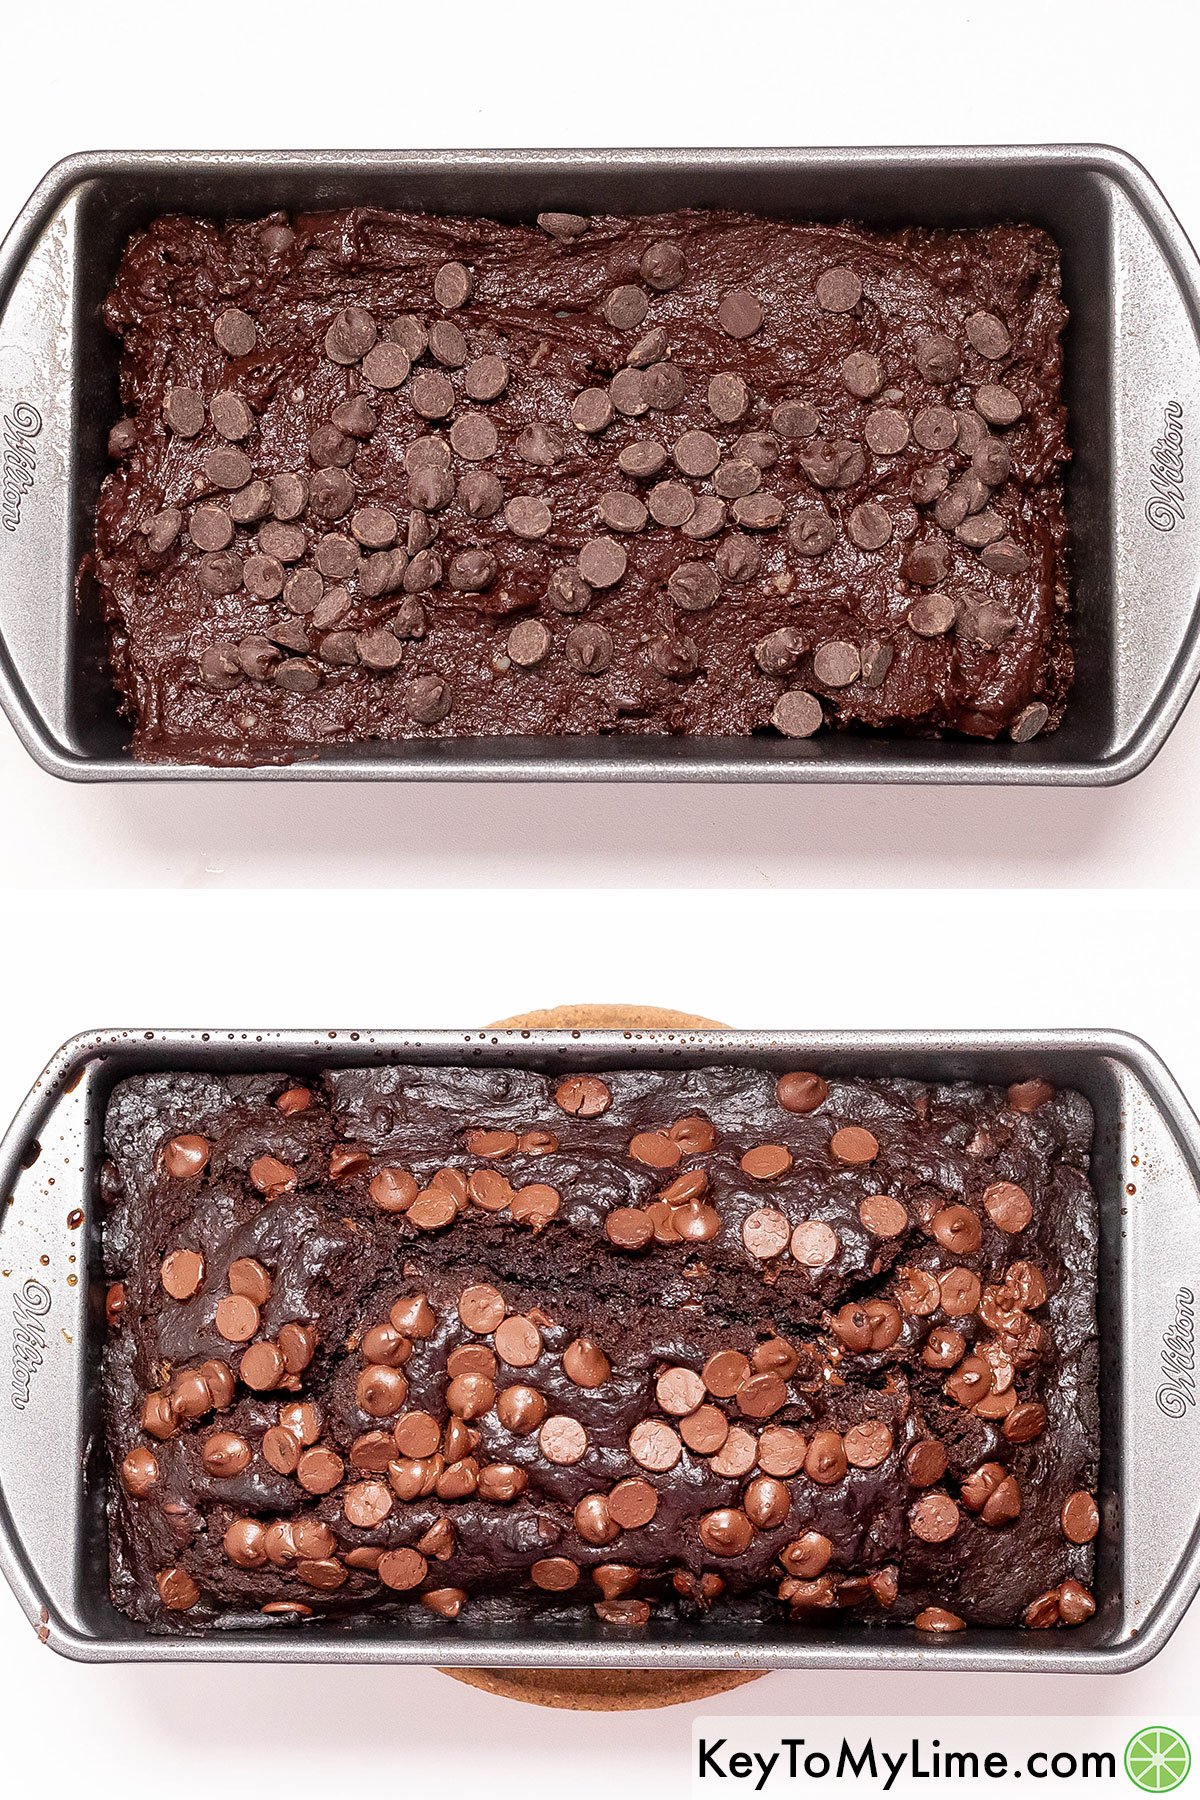 Sprinkling chocolate chips on top of the loaf cake, and then baking it.